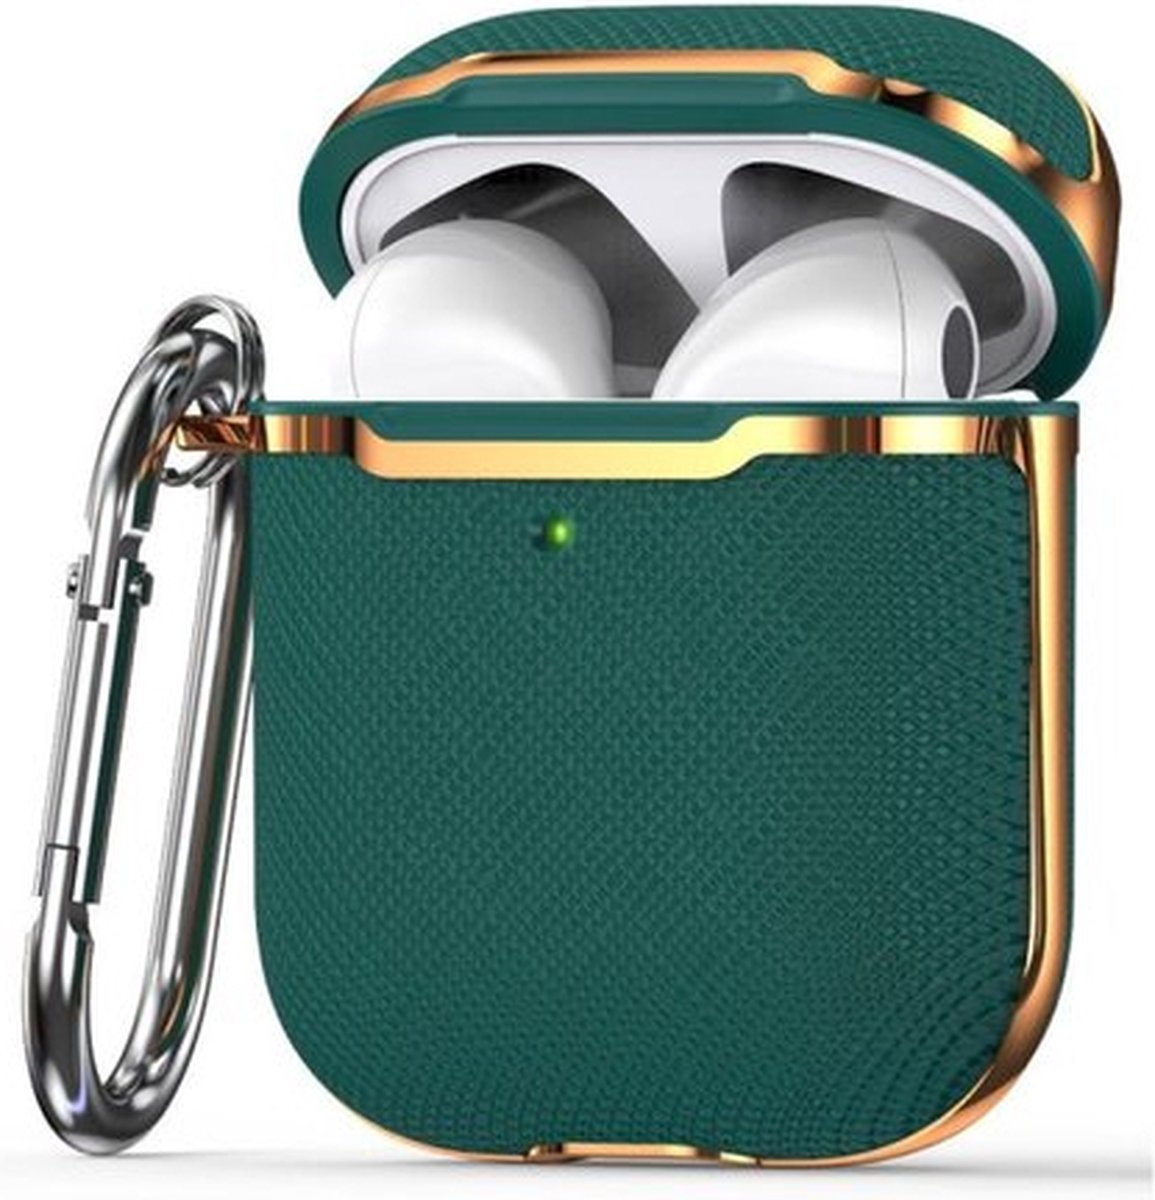 AirPods hoesjes van By Qubix AirPods 1/2 hoesje - Hardcase - Plated series - Groen + Goud Airpods Case Hoesje voor Airpods Airpods 1 Airpods 2 Hoes